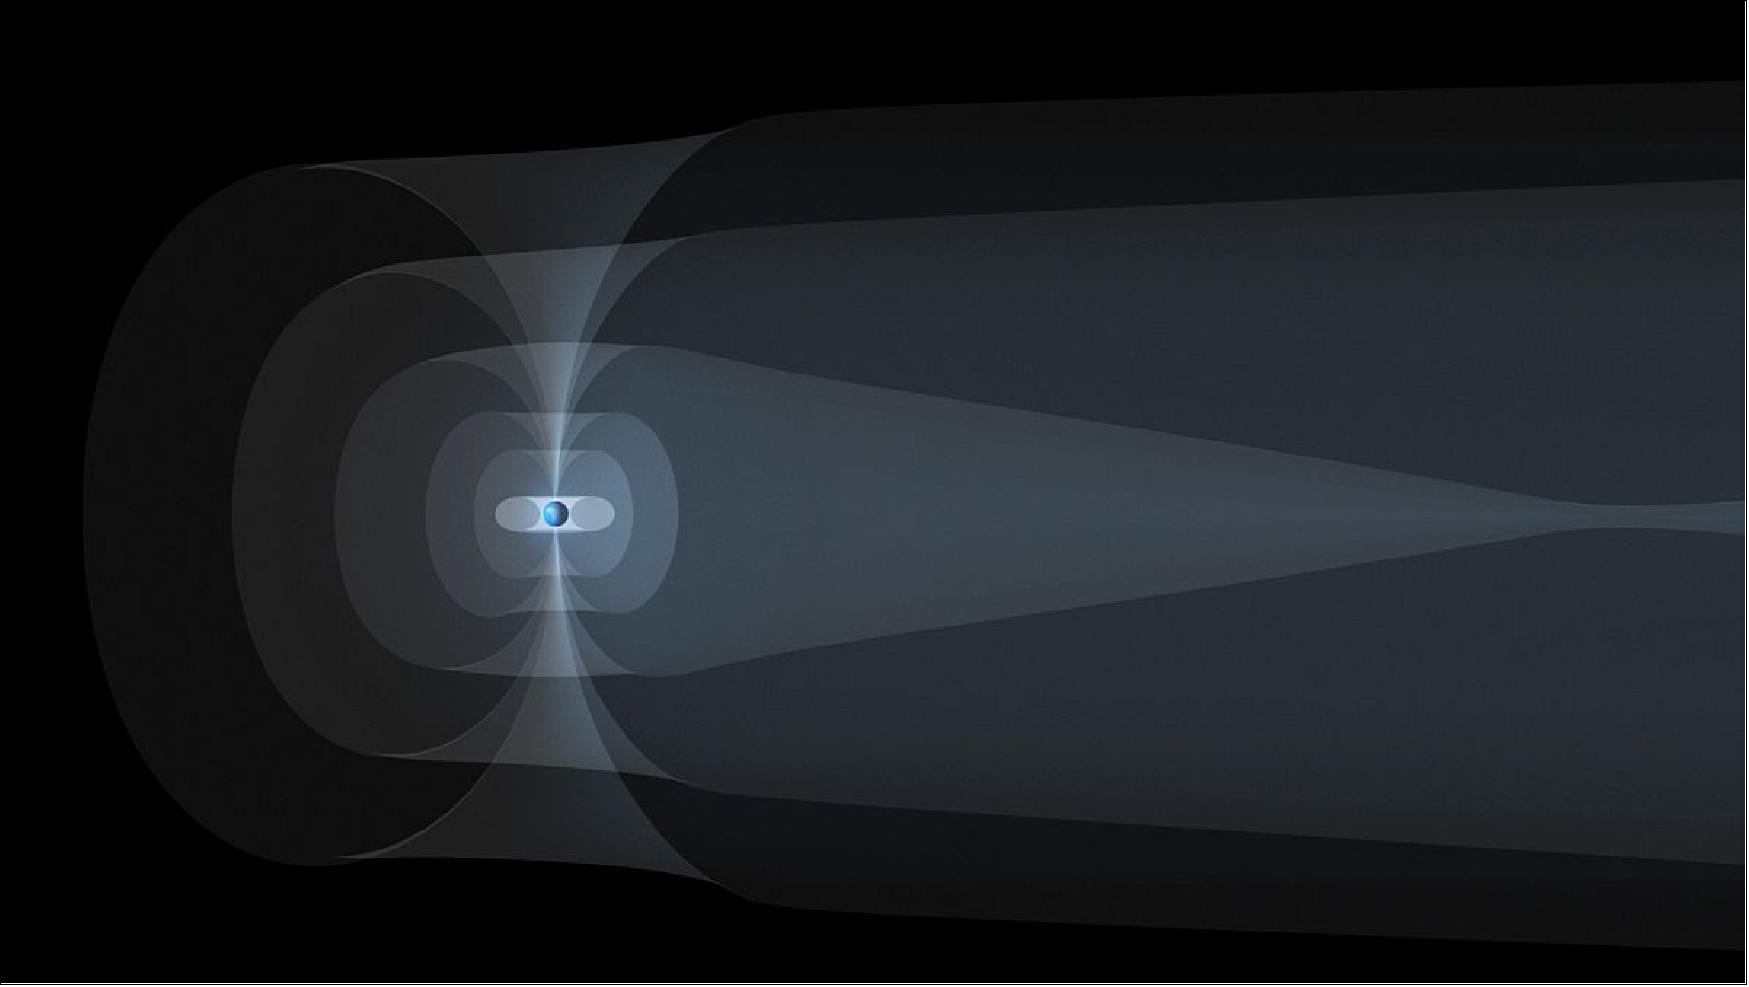 Figure 31: This illustration shows an artist's rendition of Earth's magnetosphere, the environment that surrounds our planet and is strongly shaped by its magnetic field. Beyond the outermost layers of Earth's atmosphere, space is filled with electrons and positive ions, which move along the magnetic field lines (ESA/ATG medialab)